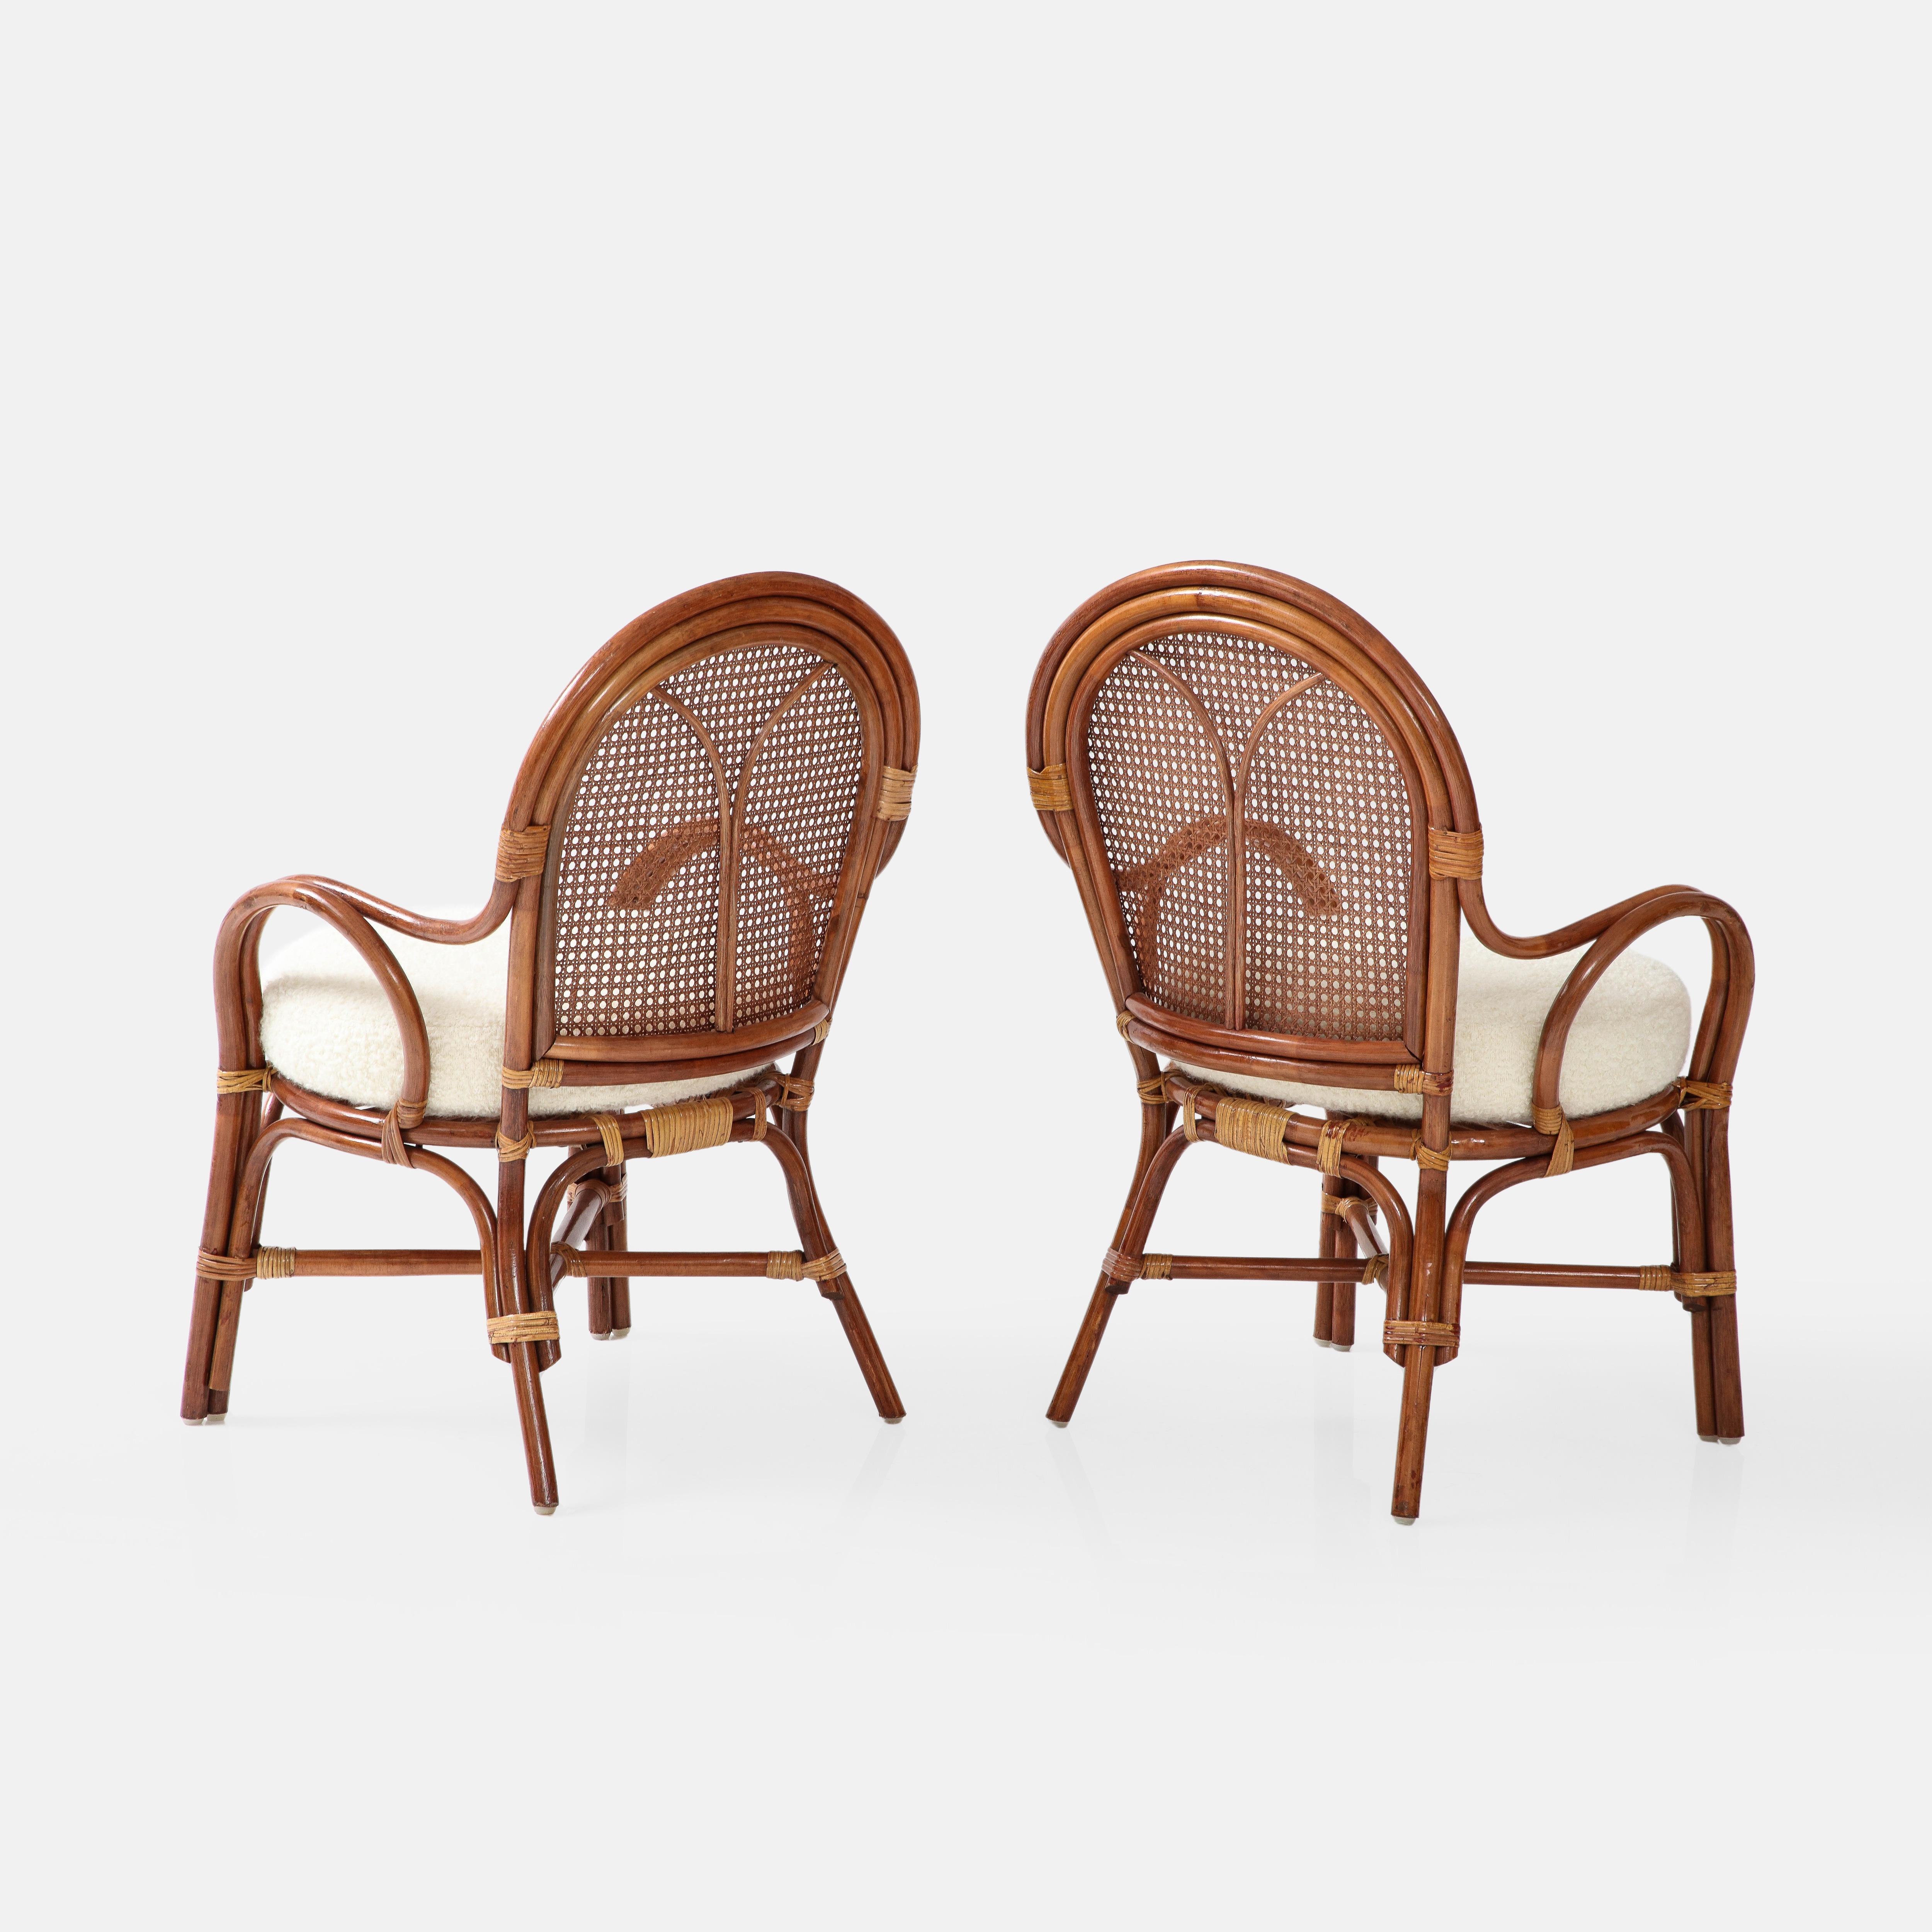 1950s Italian Pair of Bamboo and Rattan Armchairs with Ivory Bouclé Cushions In Good Condition For Sale In New York, NY